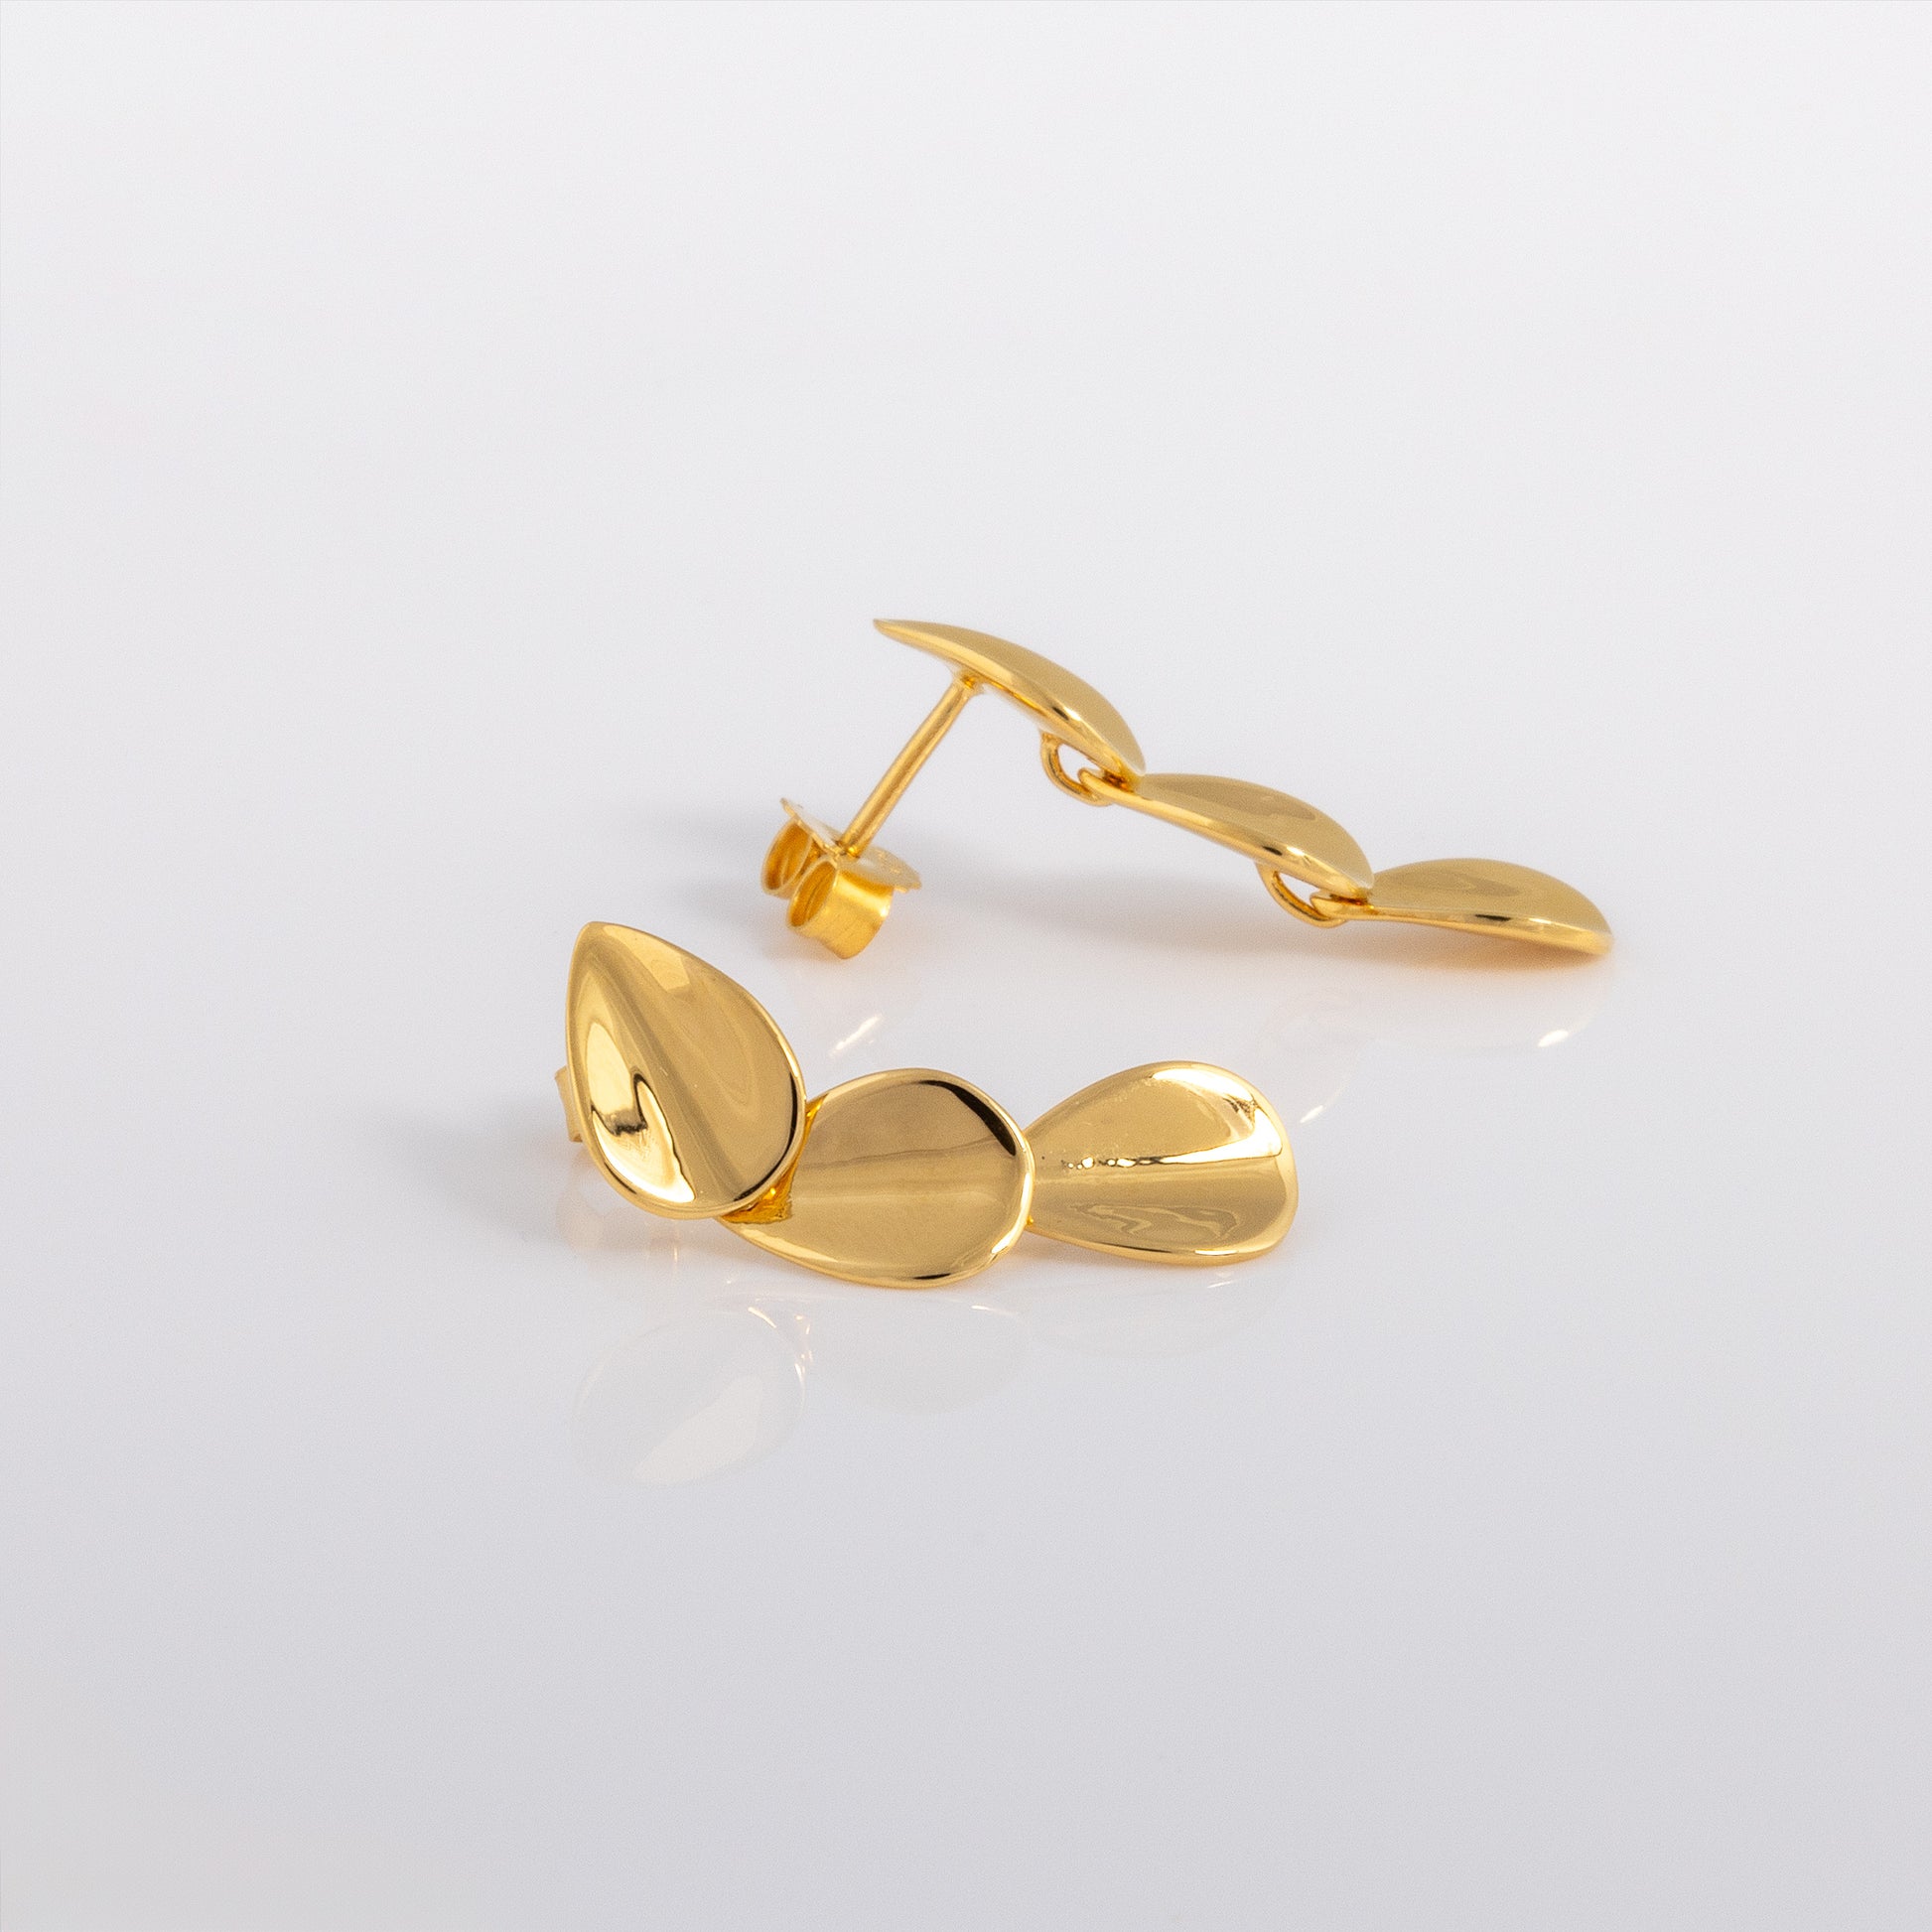 Dangly Stud Earrings with Three Gold Vermeil Falling Drops